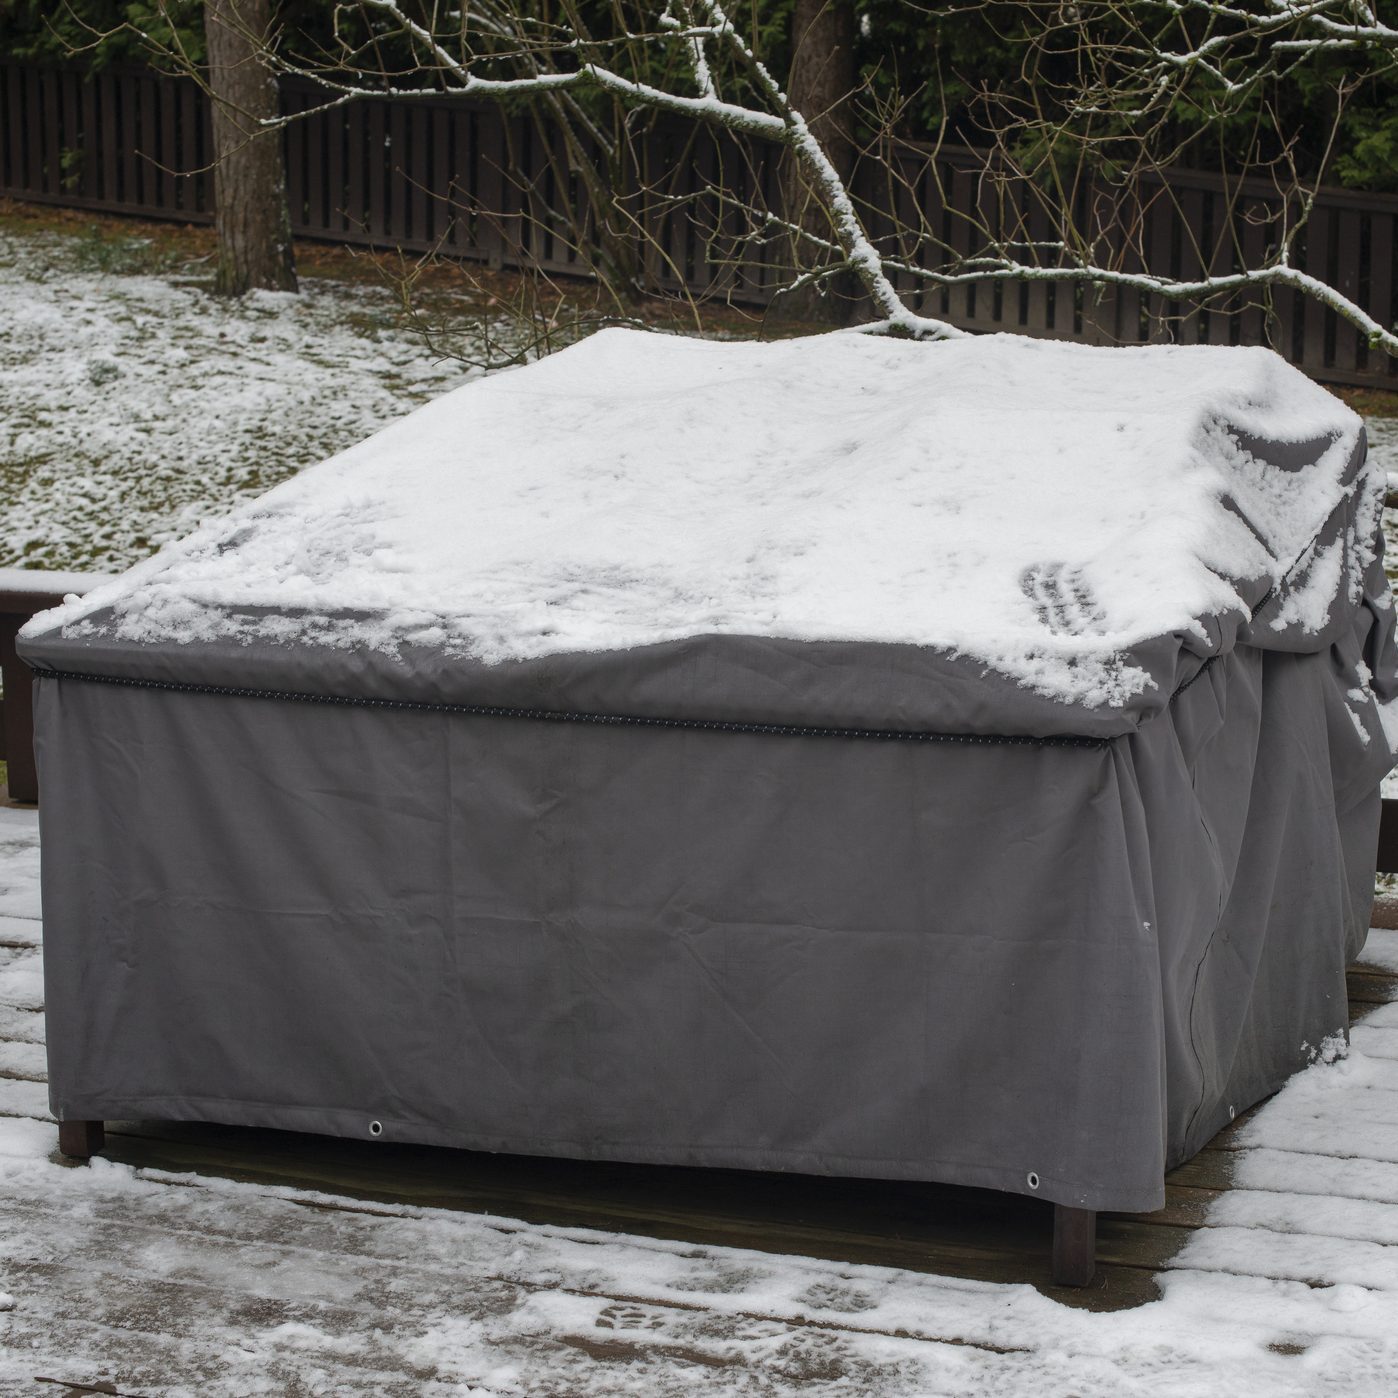 Patio furniture Cover protecting outdoor furniture from snow, close up.